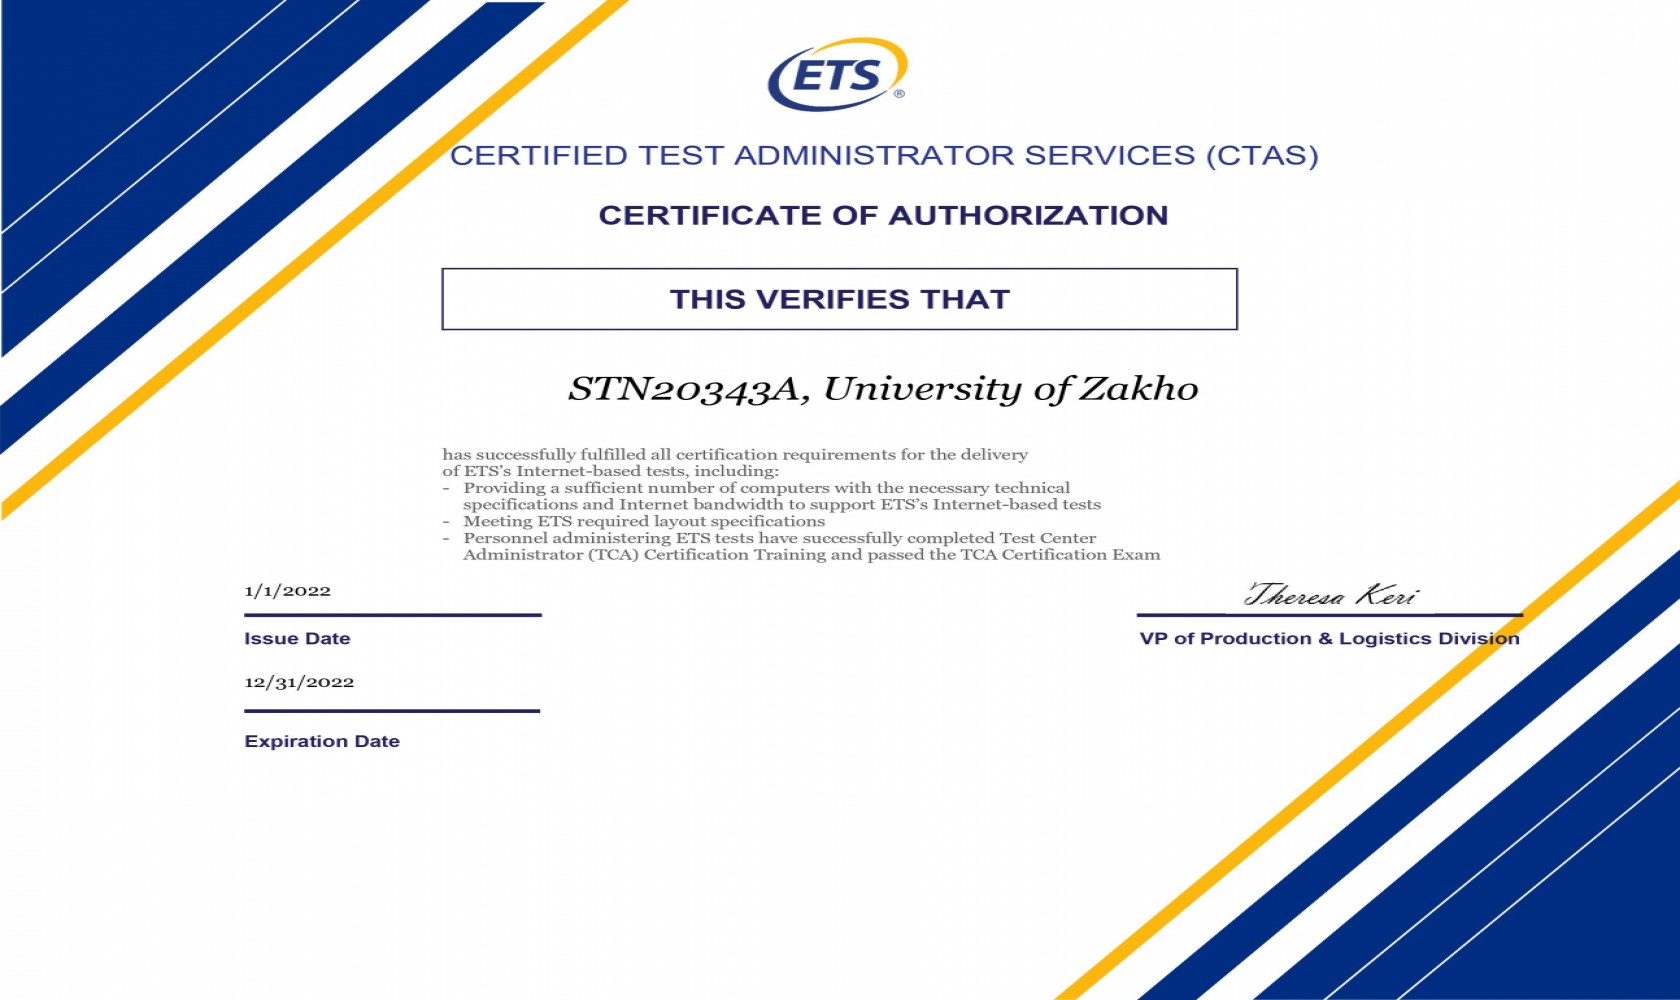 Certificate Of Authorization Was Successfully Granted By ETS